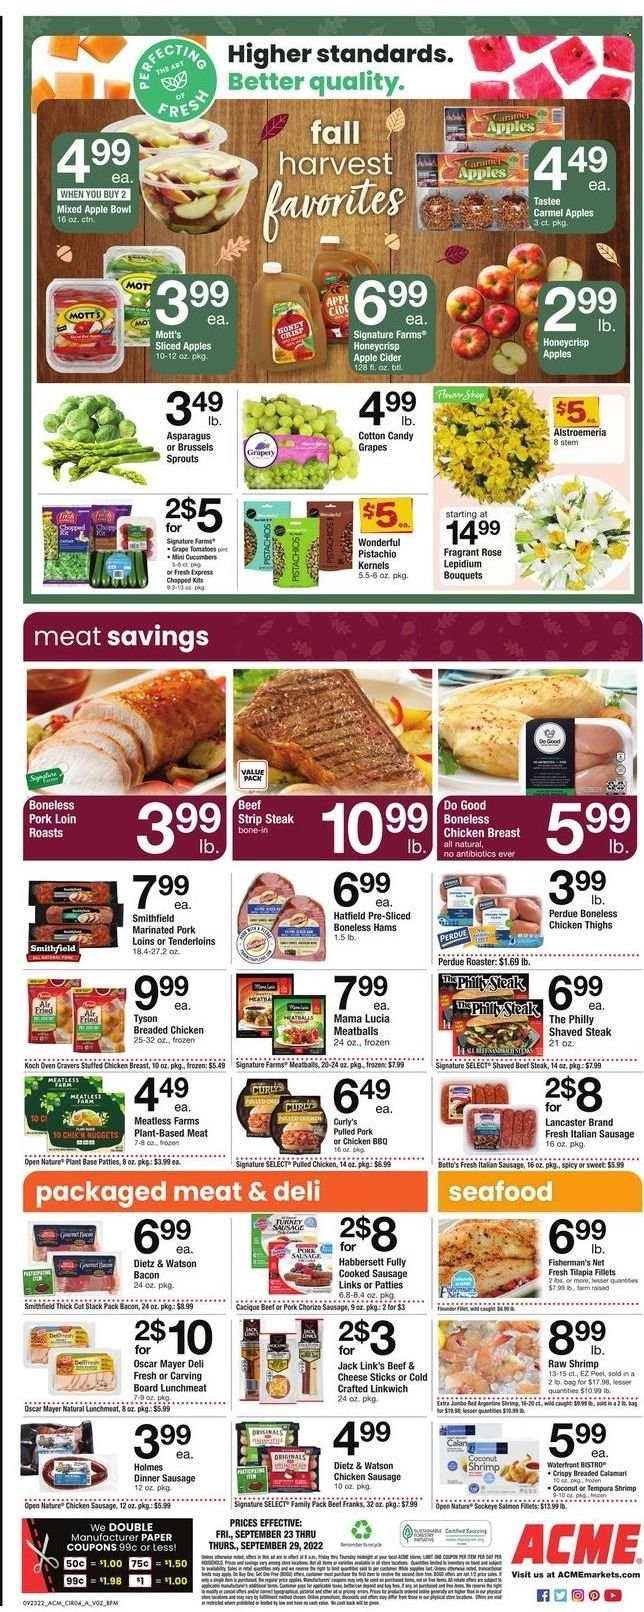 thumbnail - ACME Flyer - 09/23/2022 - 09/29/2022 - Sales products - asparagus, cucumber, brussel sprouts, Mott's, calamari, salmon, salmon fillet, tilapia, seafood, shrimps, meatballs, nuggets, Perdue®, pulled pork, pulled chicken, stuffed chicken, bacon, chorizo, Oscar Mayer, Dietz & Watson, pork sausage, chicken sausage, italian sausage, lunch meat, cheese sticks, cotton candy, Jack Link's, caramel, wine, rosé wine, apple cider, cider, chicken thighs, beef meat, beef steak, steak, striploin steak, pork loin, pork meat, marinated pork, bowl, paper, roaster. Page 4.